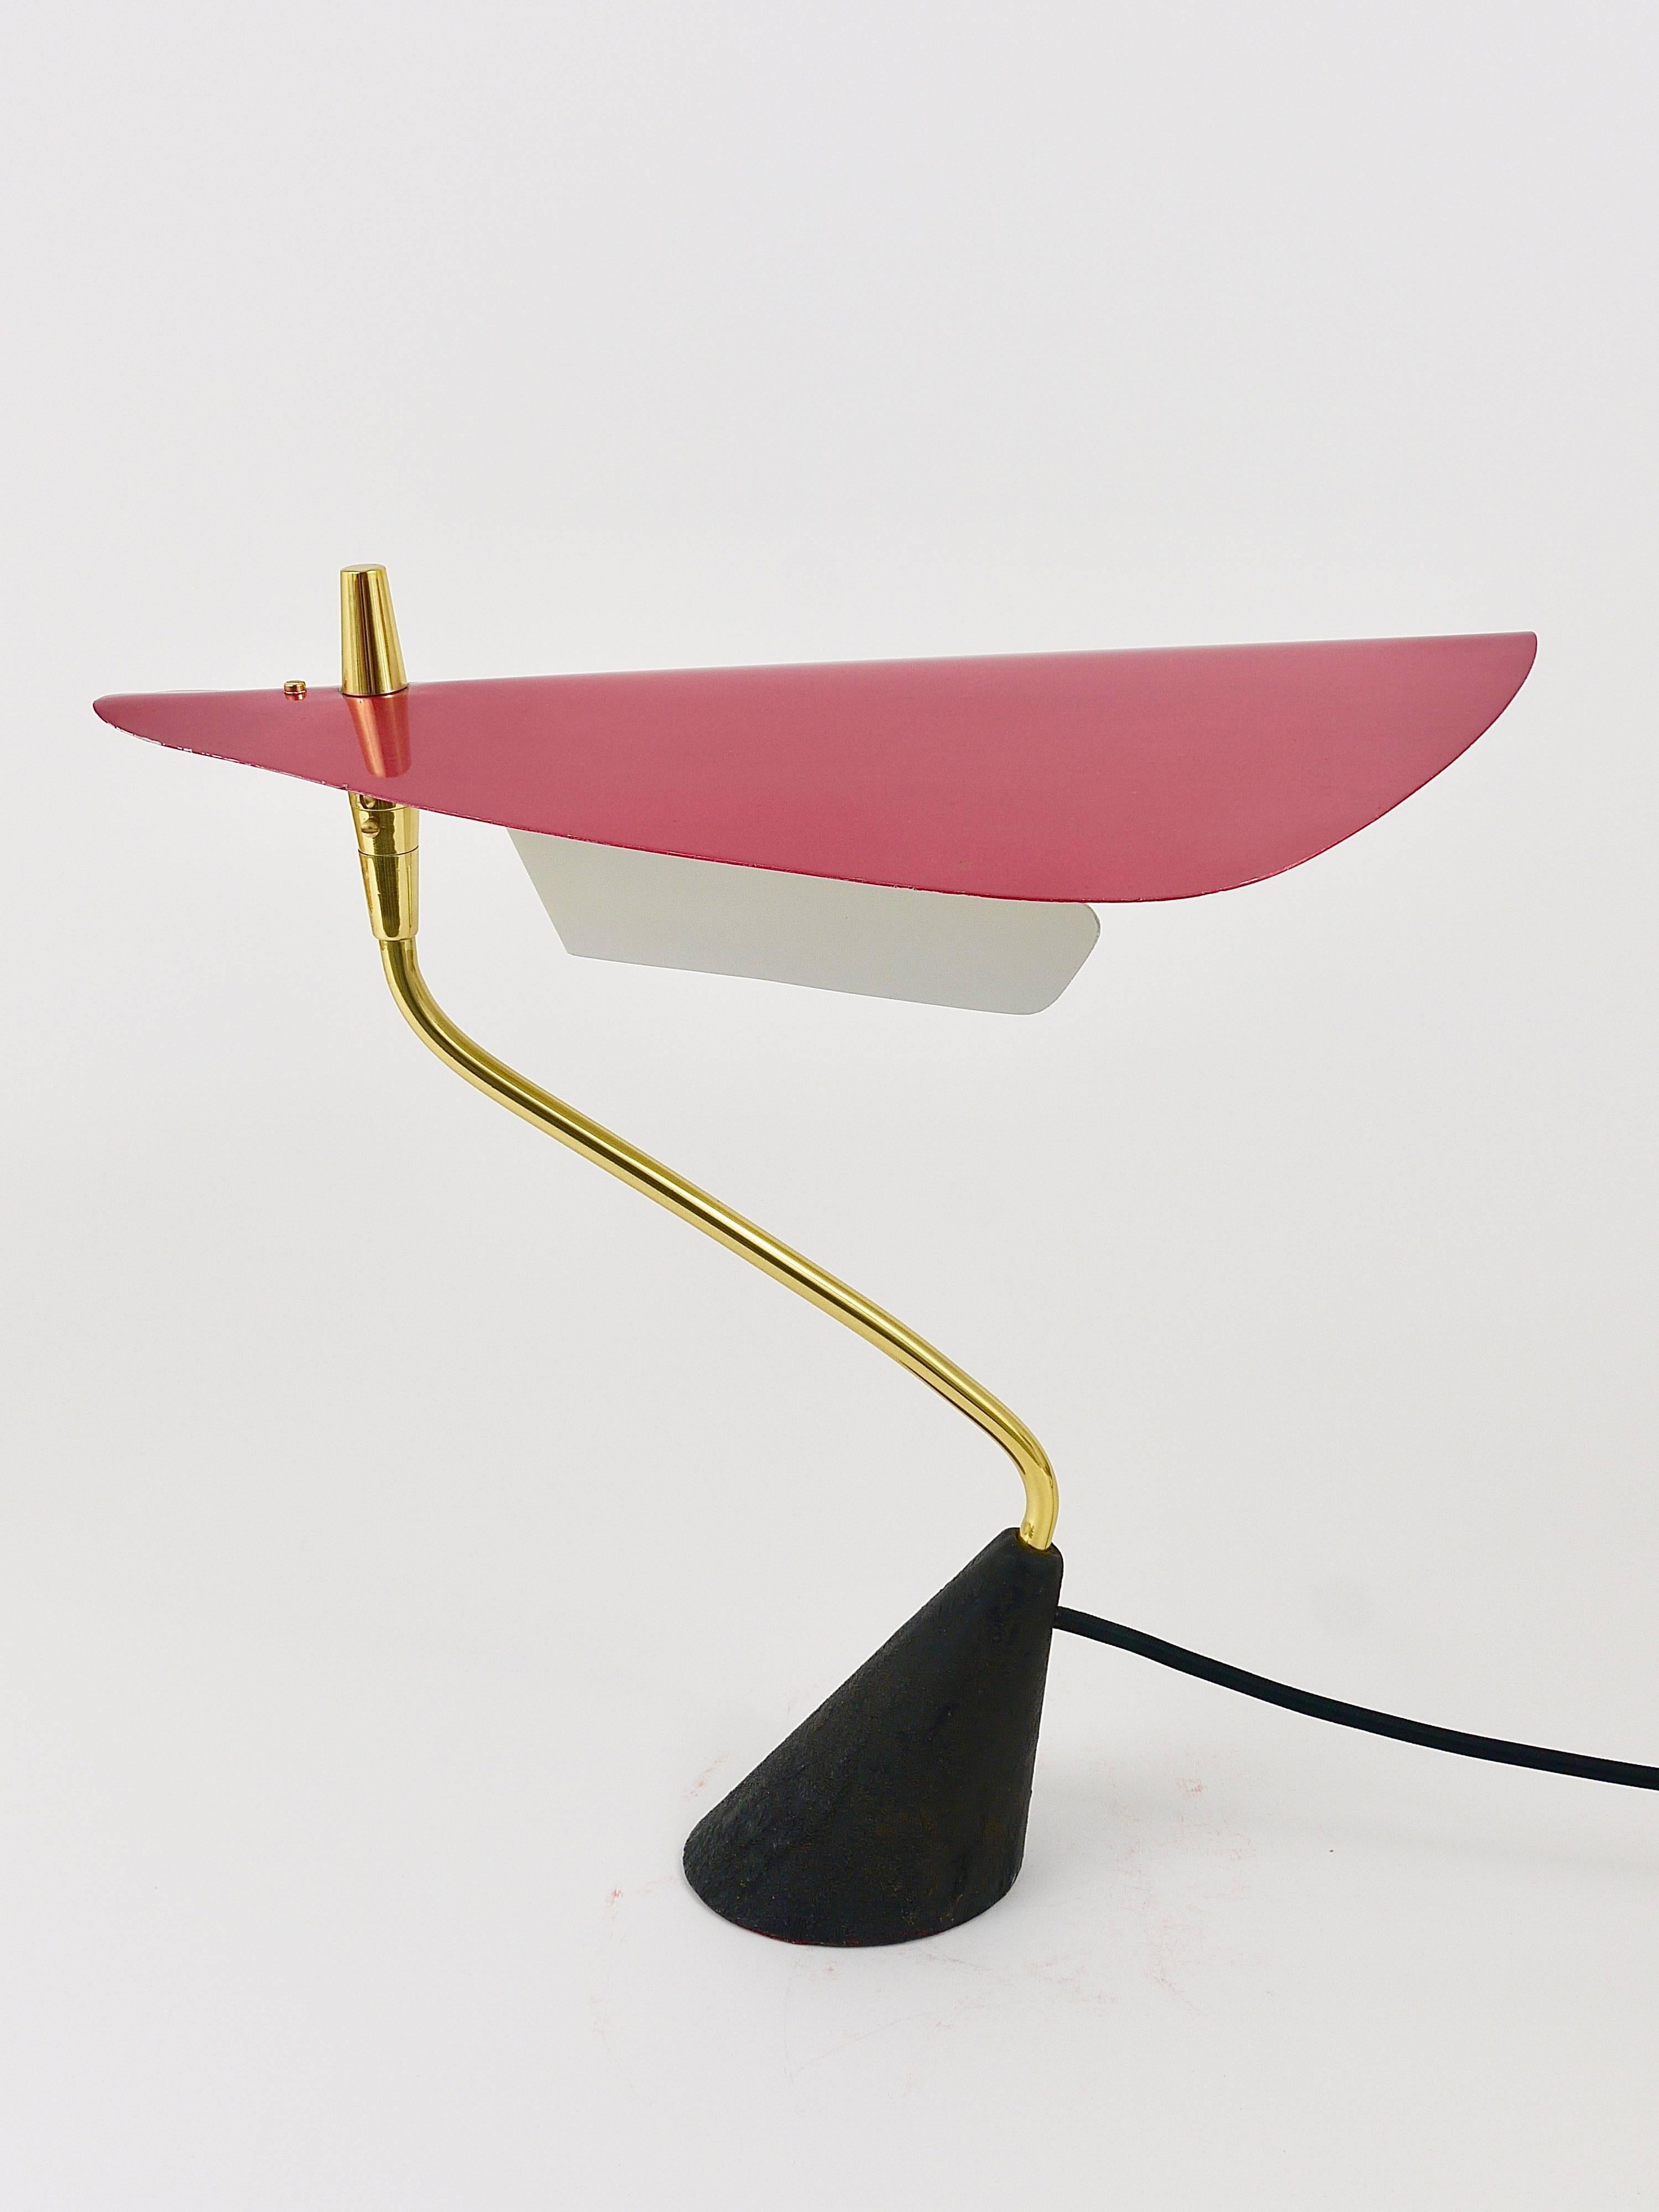 A sculptural table or desk lamp from the 1950s, executed by Werkstätte Karl Hagenauer. Has a conical black patinated cast-iron base, an asymmetrical brass tube and a red anodized aluminium lampshade with white lacquered interior. The lampshade is